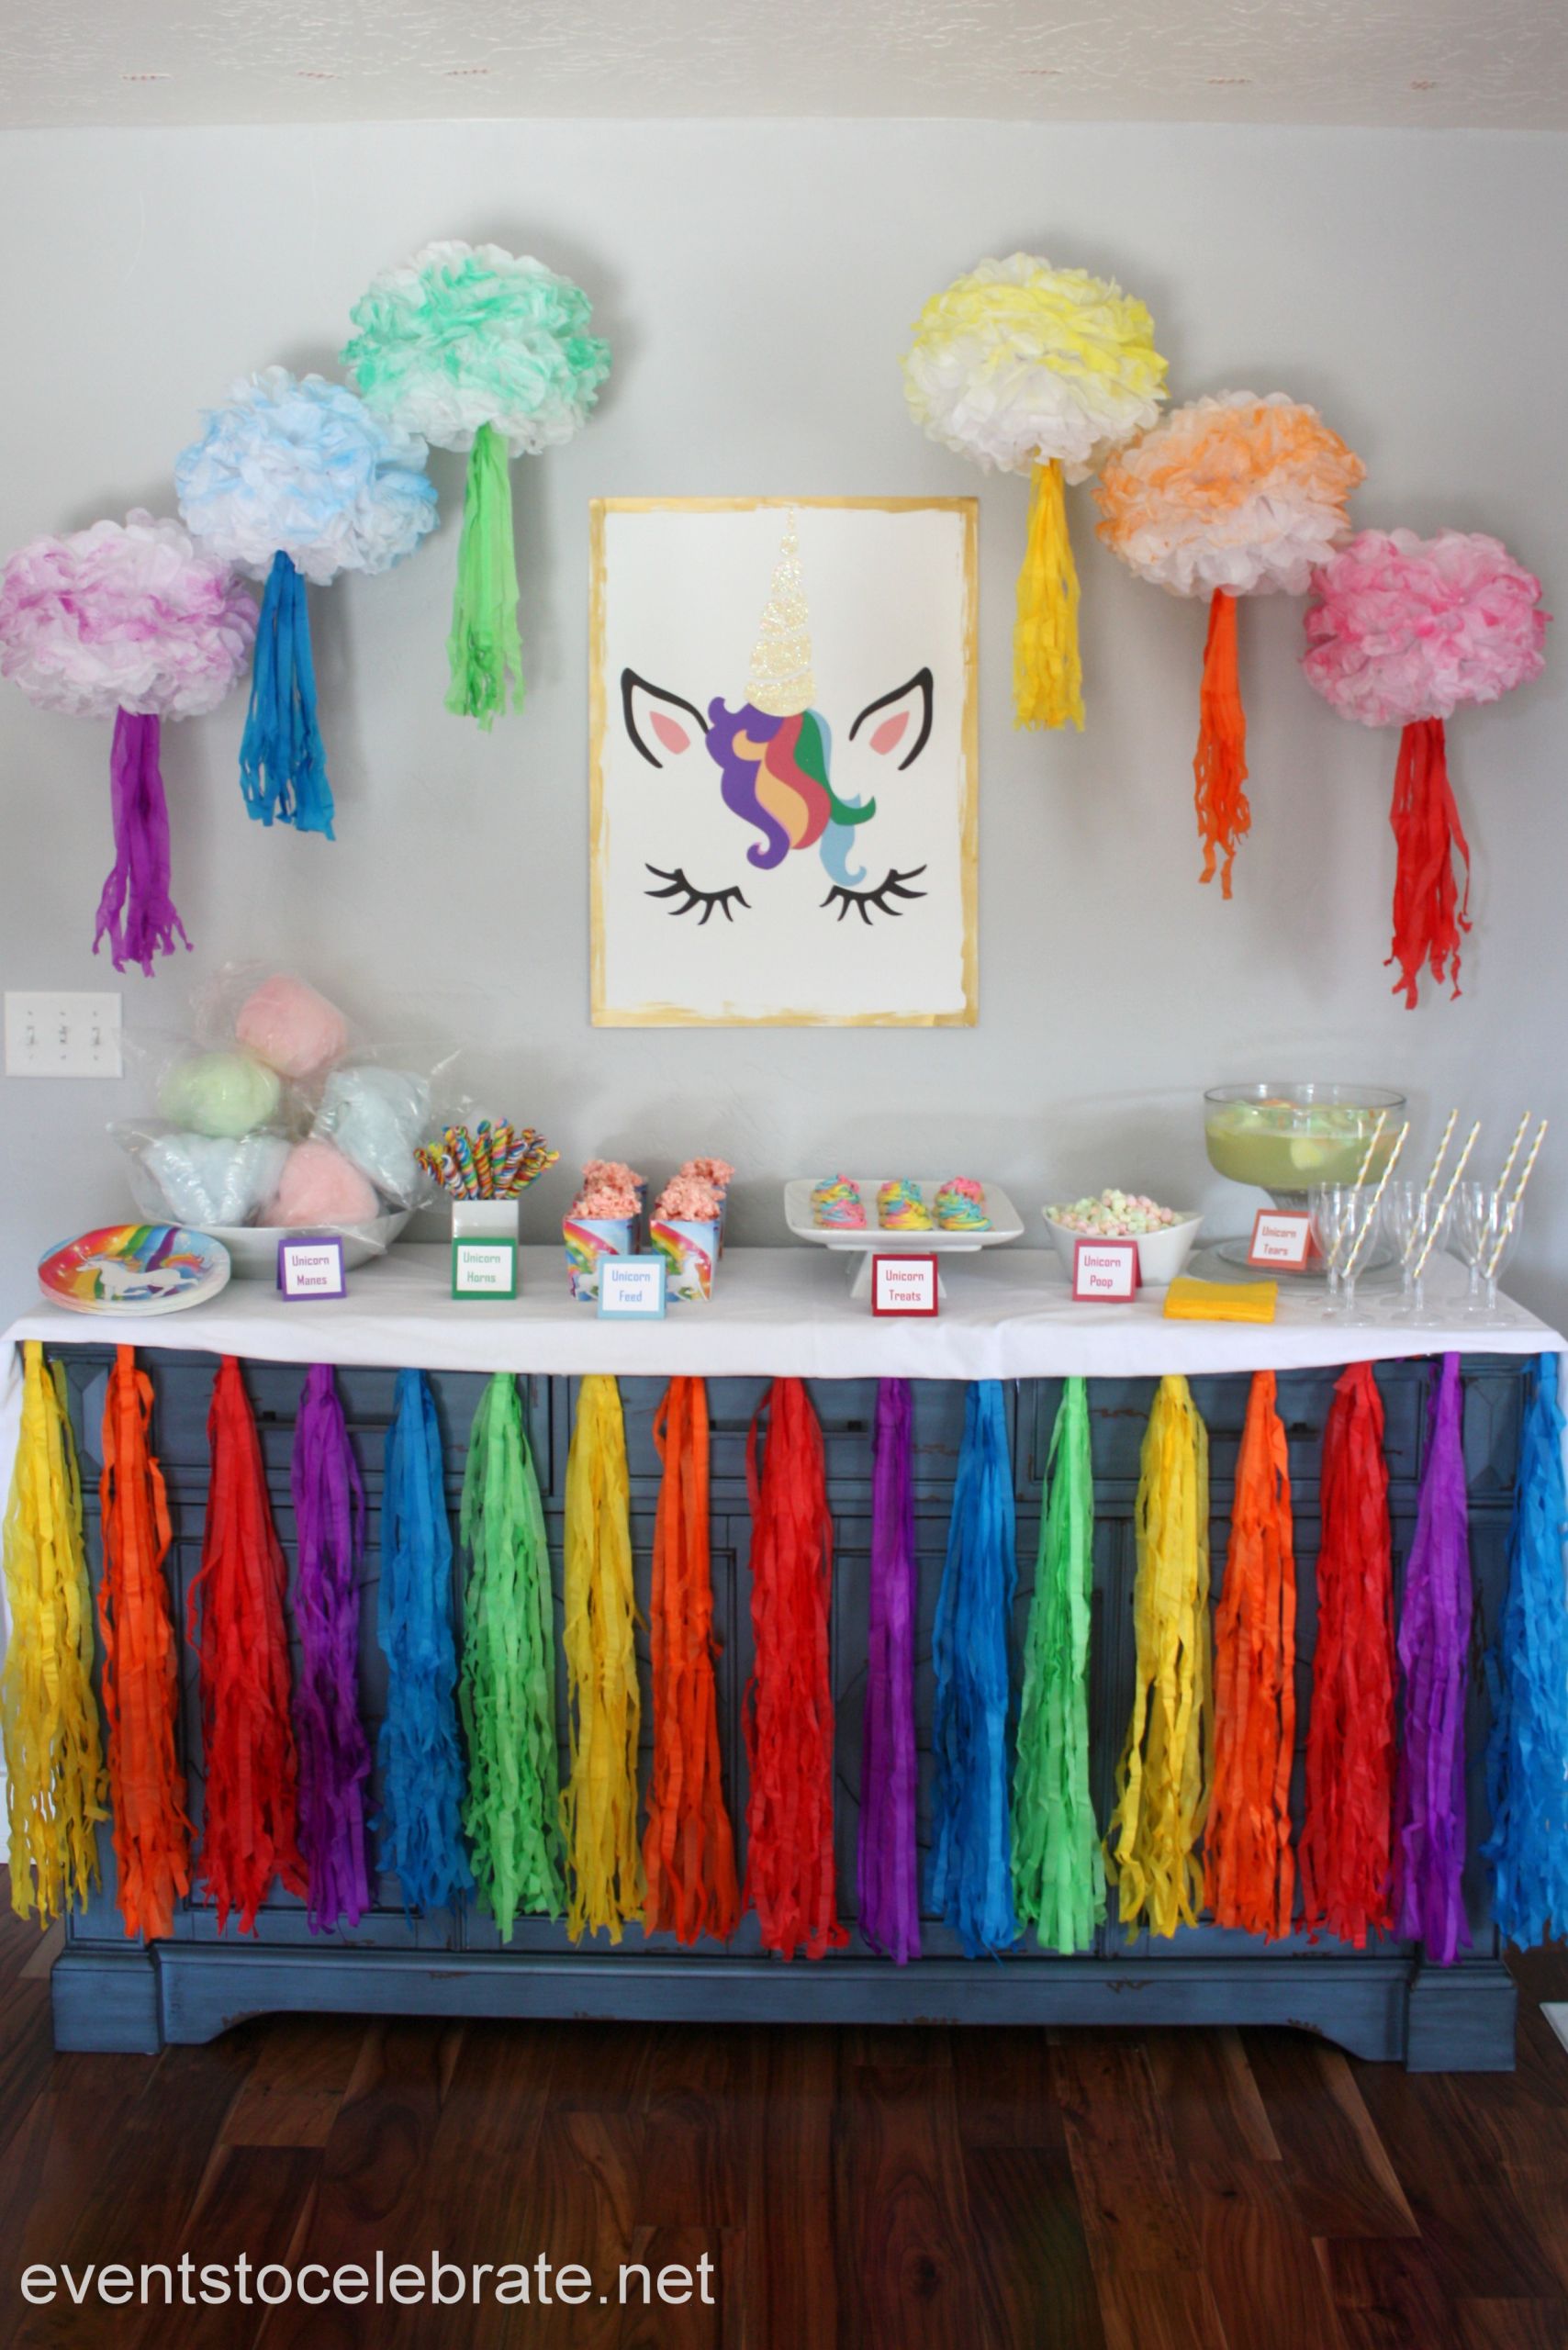 How To Decorate Birthday Party
 Unicorn Party Decorations and Food